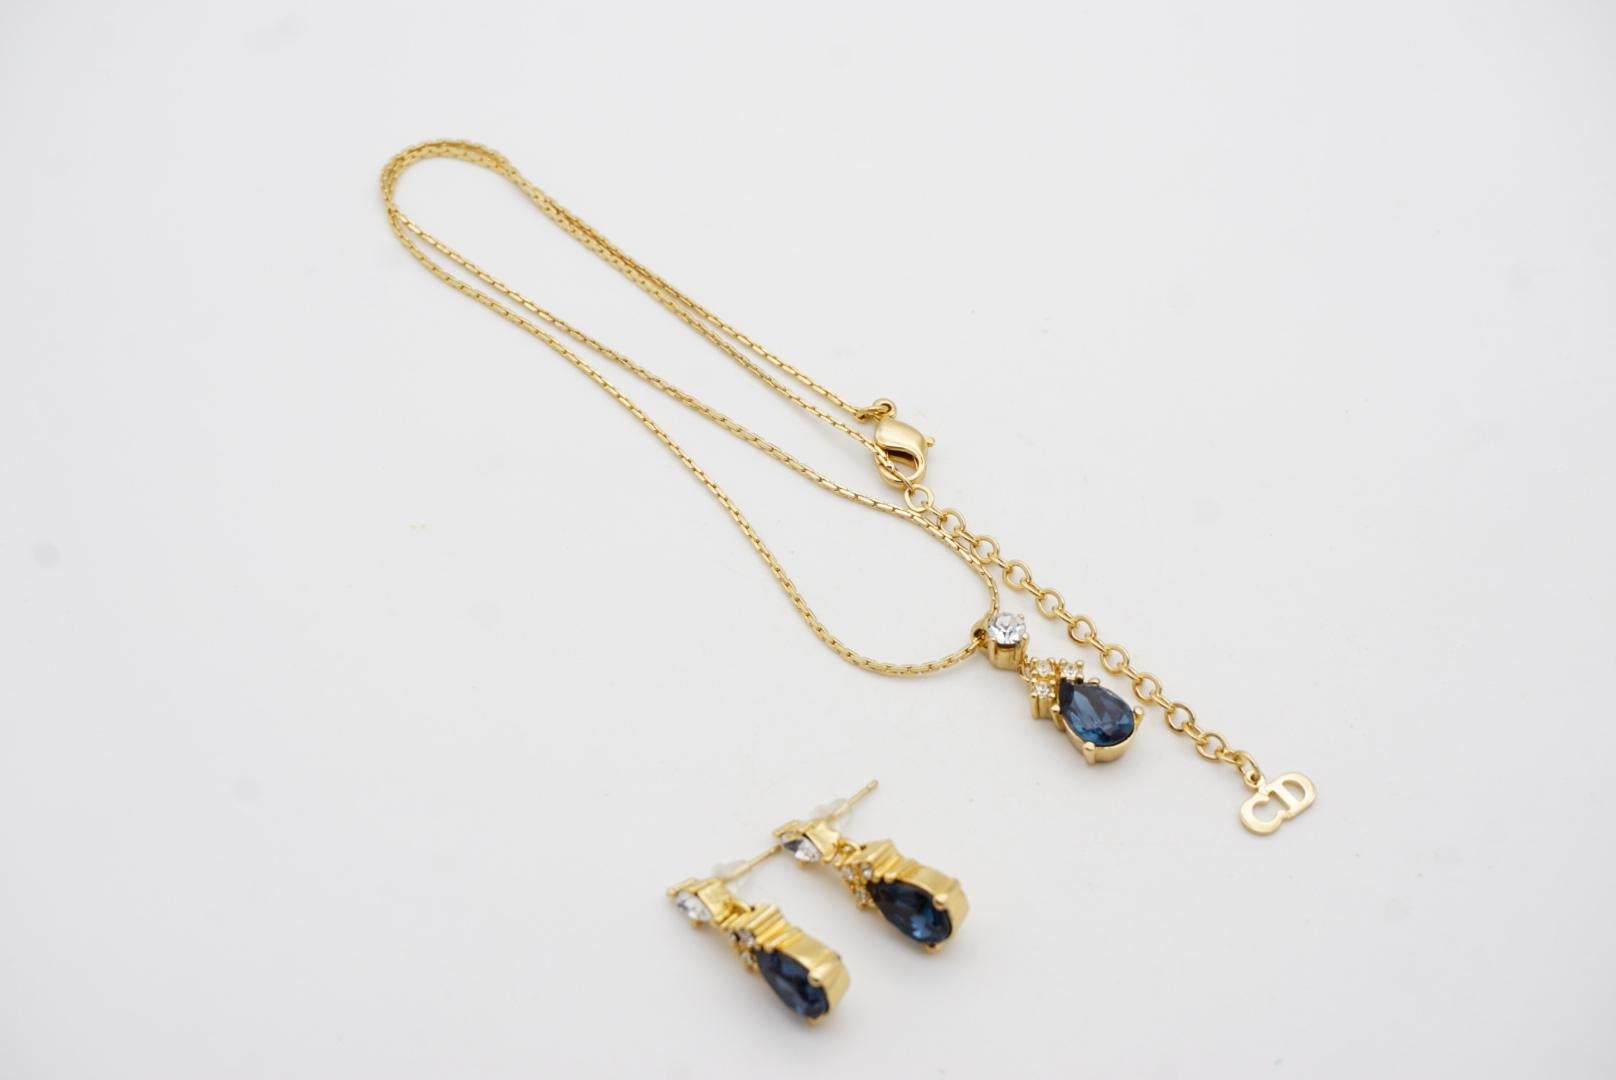 Christian Dior Vintage 1980s Sapphire Crystal Water Drop Set Necklace Earrings For Sale 7